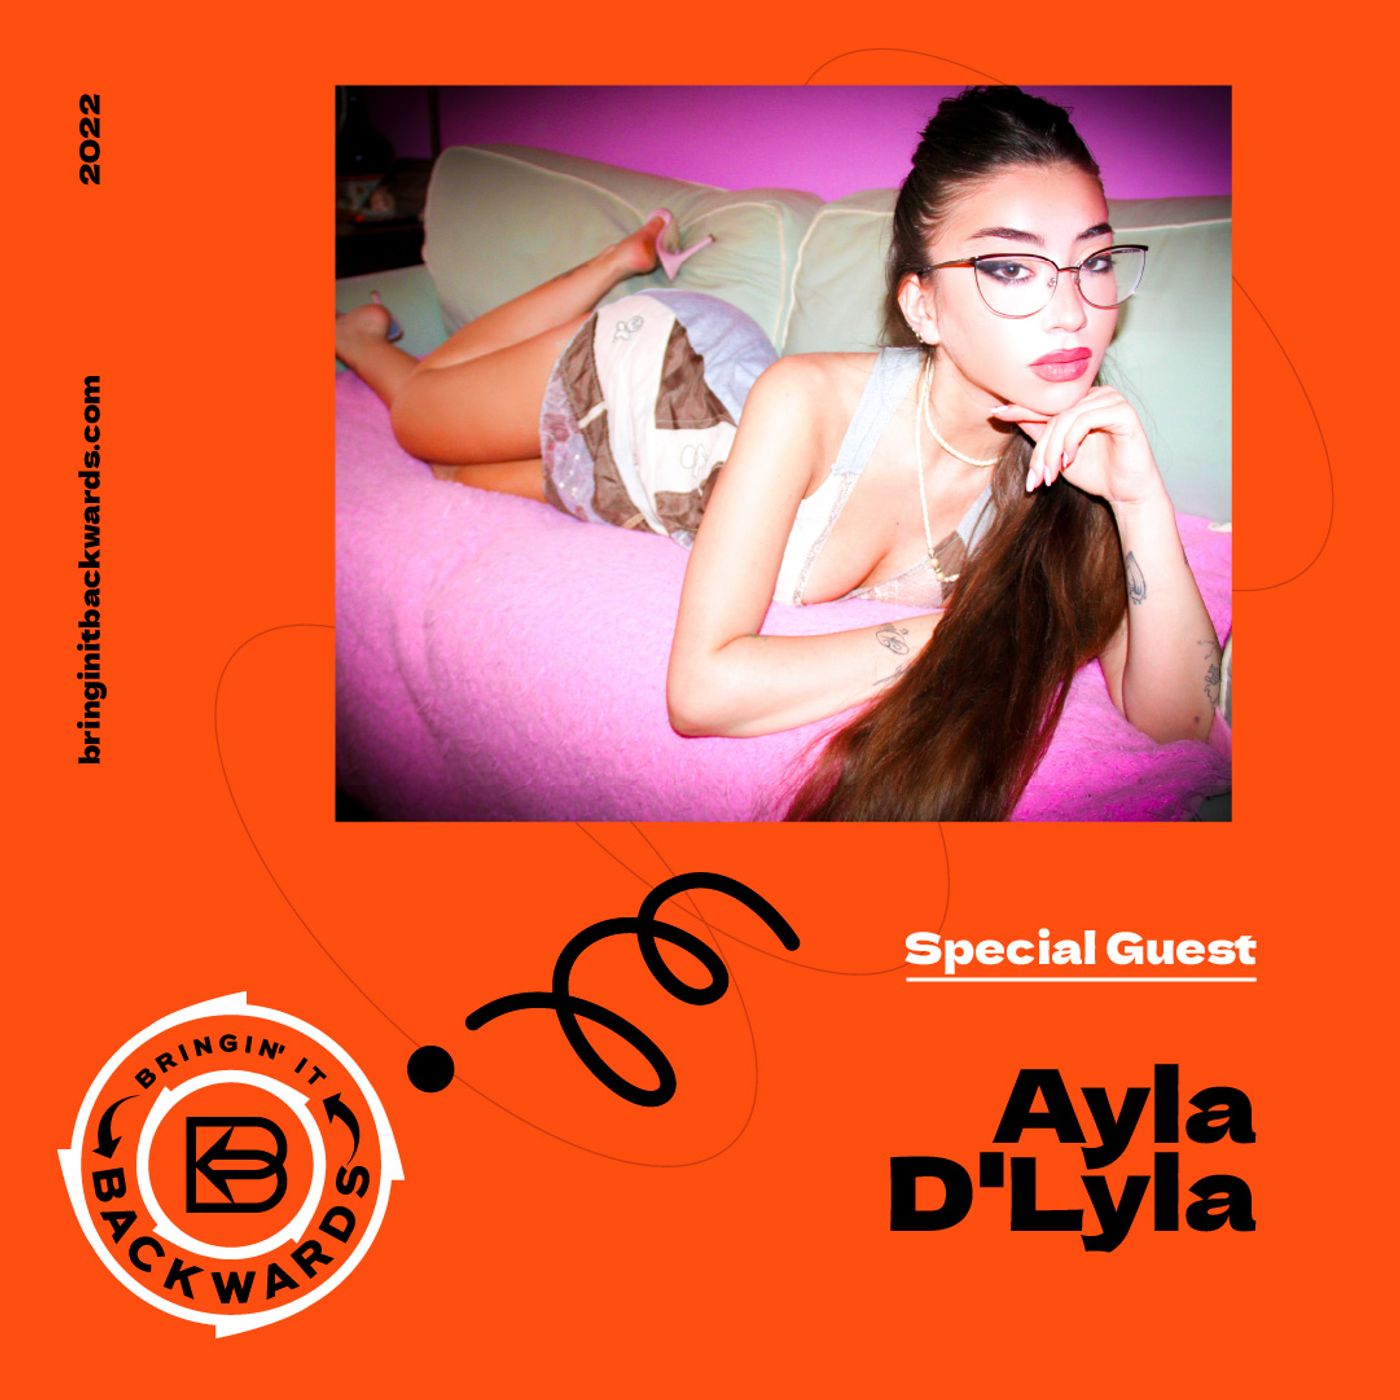 Interview with Ayla D'Lyla